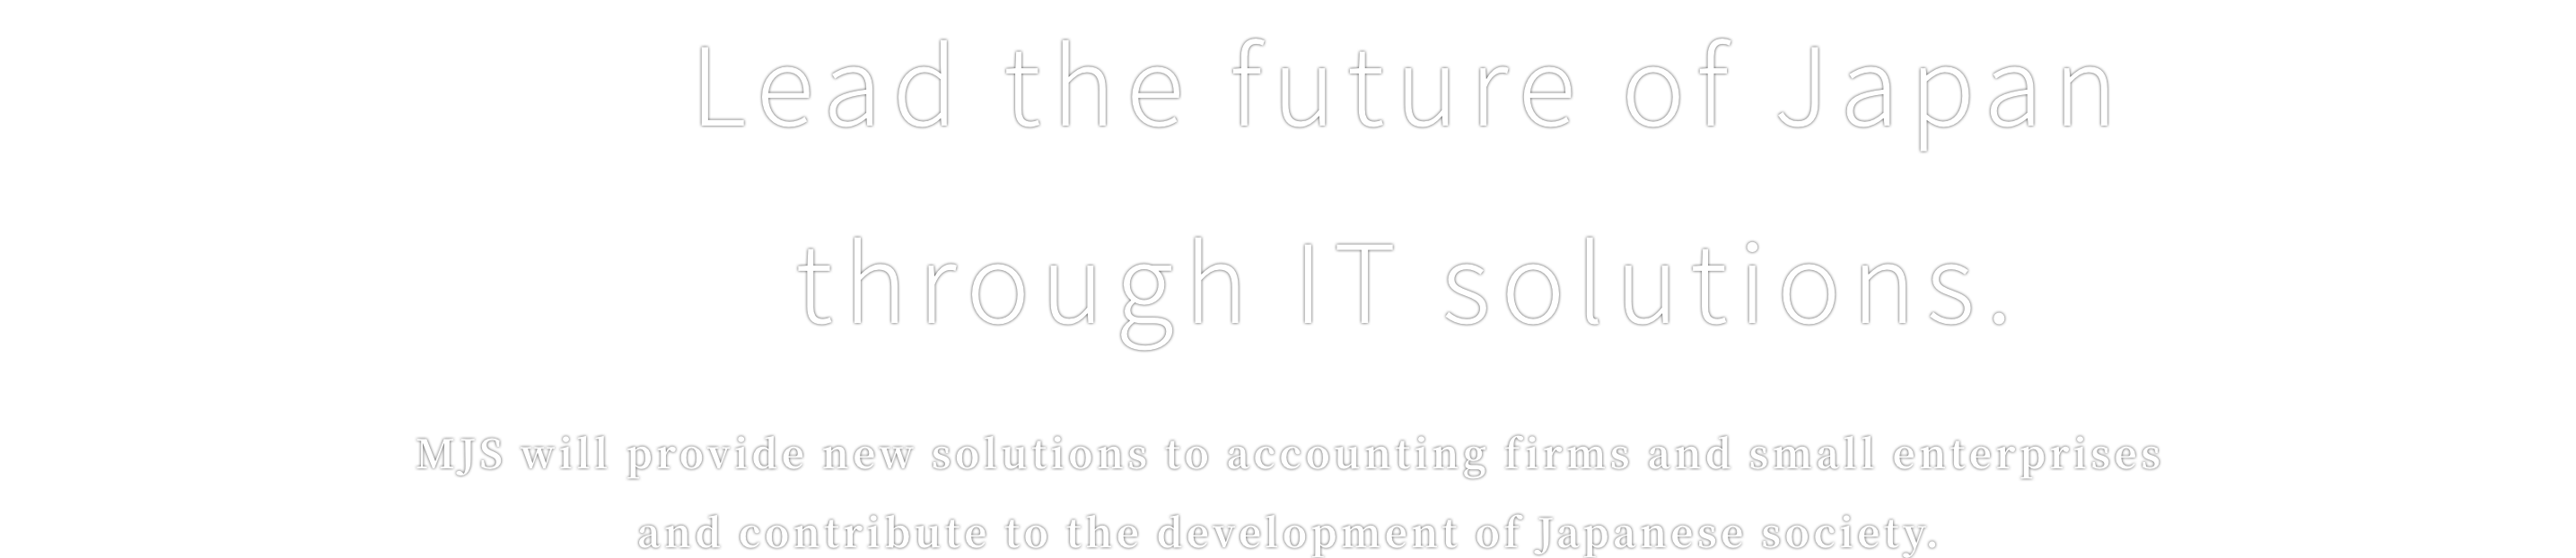 Lead the future of Japan through IT solutions.MJS will provide new solutions to accounting firms and small enterprises and contribute to the development of Japanese society.